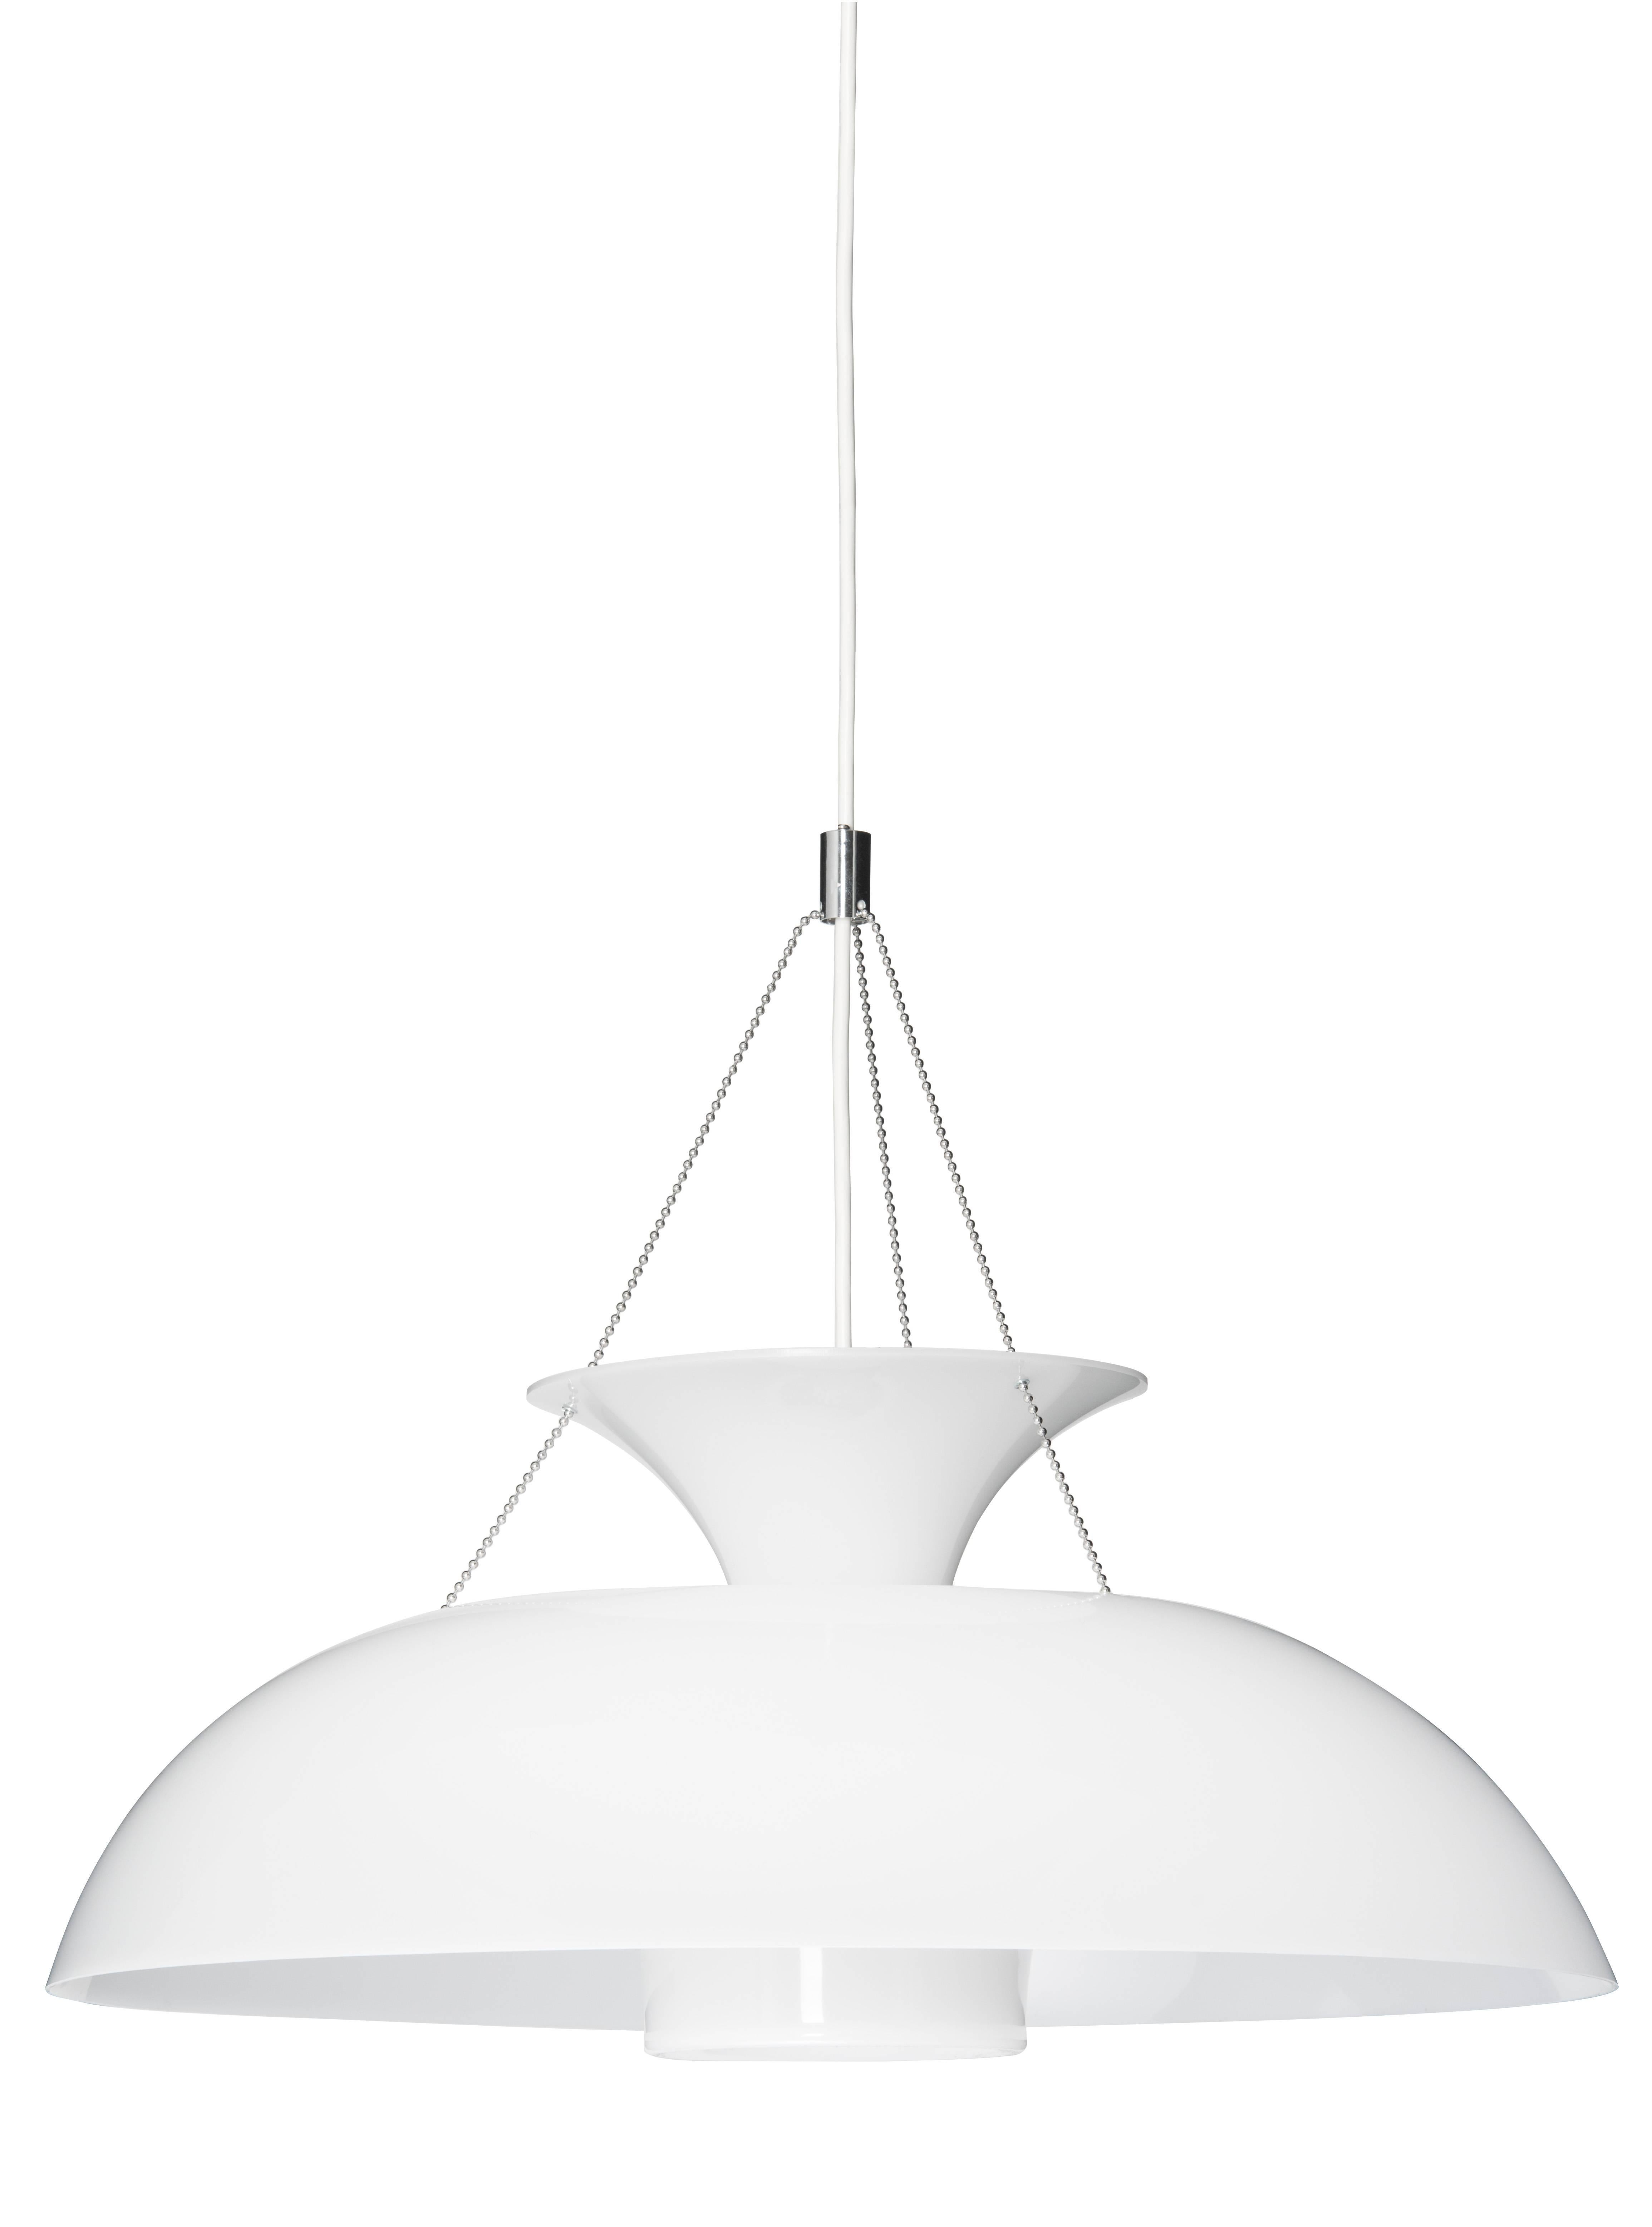 Yrjö Harsia 'Taifuuni' Pendant for Innolux Oy, Finland. Designed in 1969, Harsia's innovative 'Taifuuni' represents this undeservedly obscure designer's most iconic work. Executed in two partially nested acrylic elements, which creates a